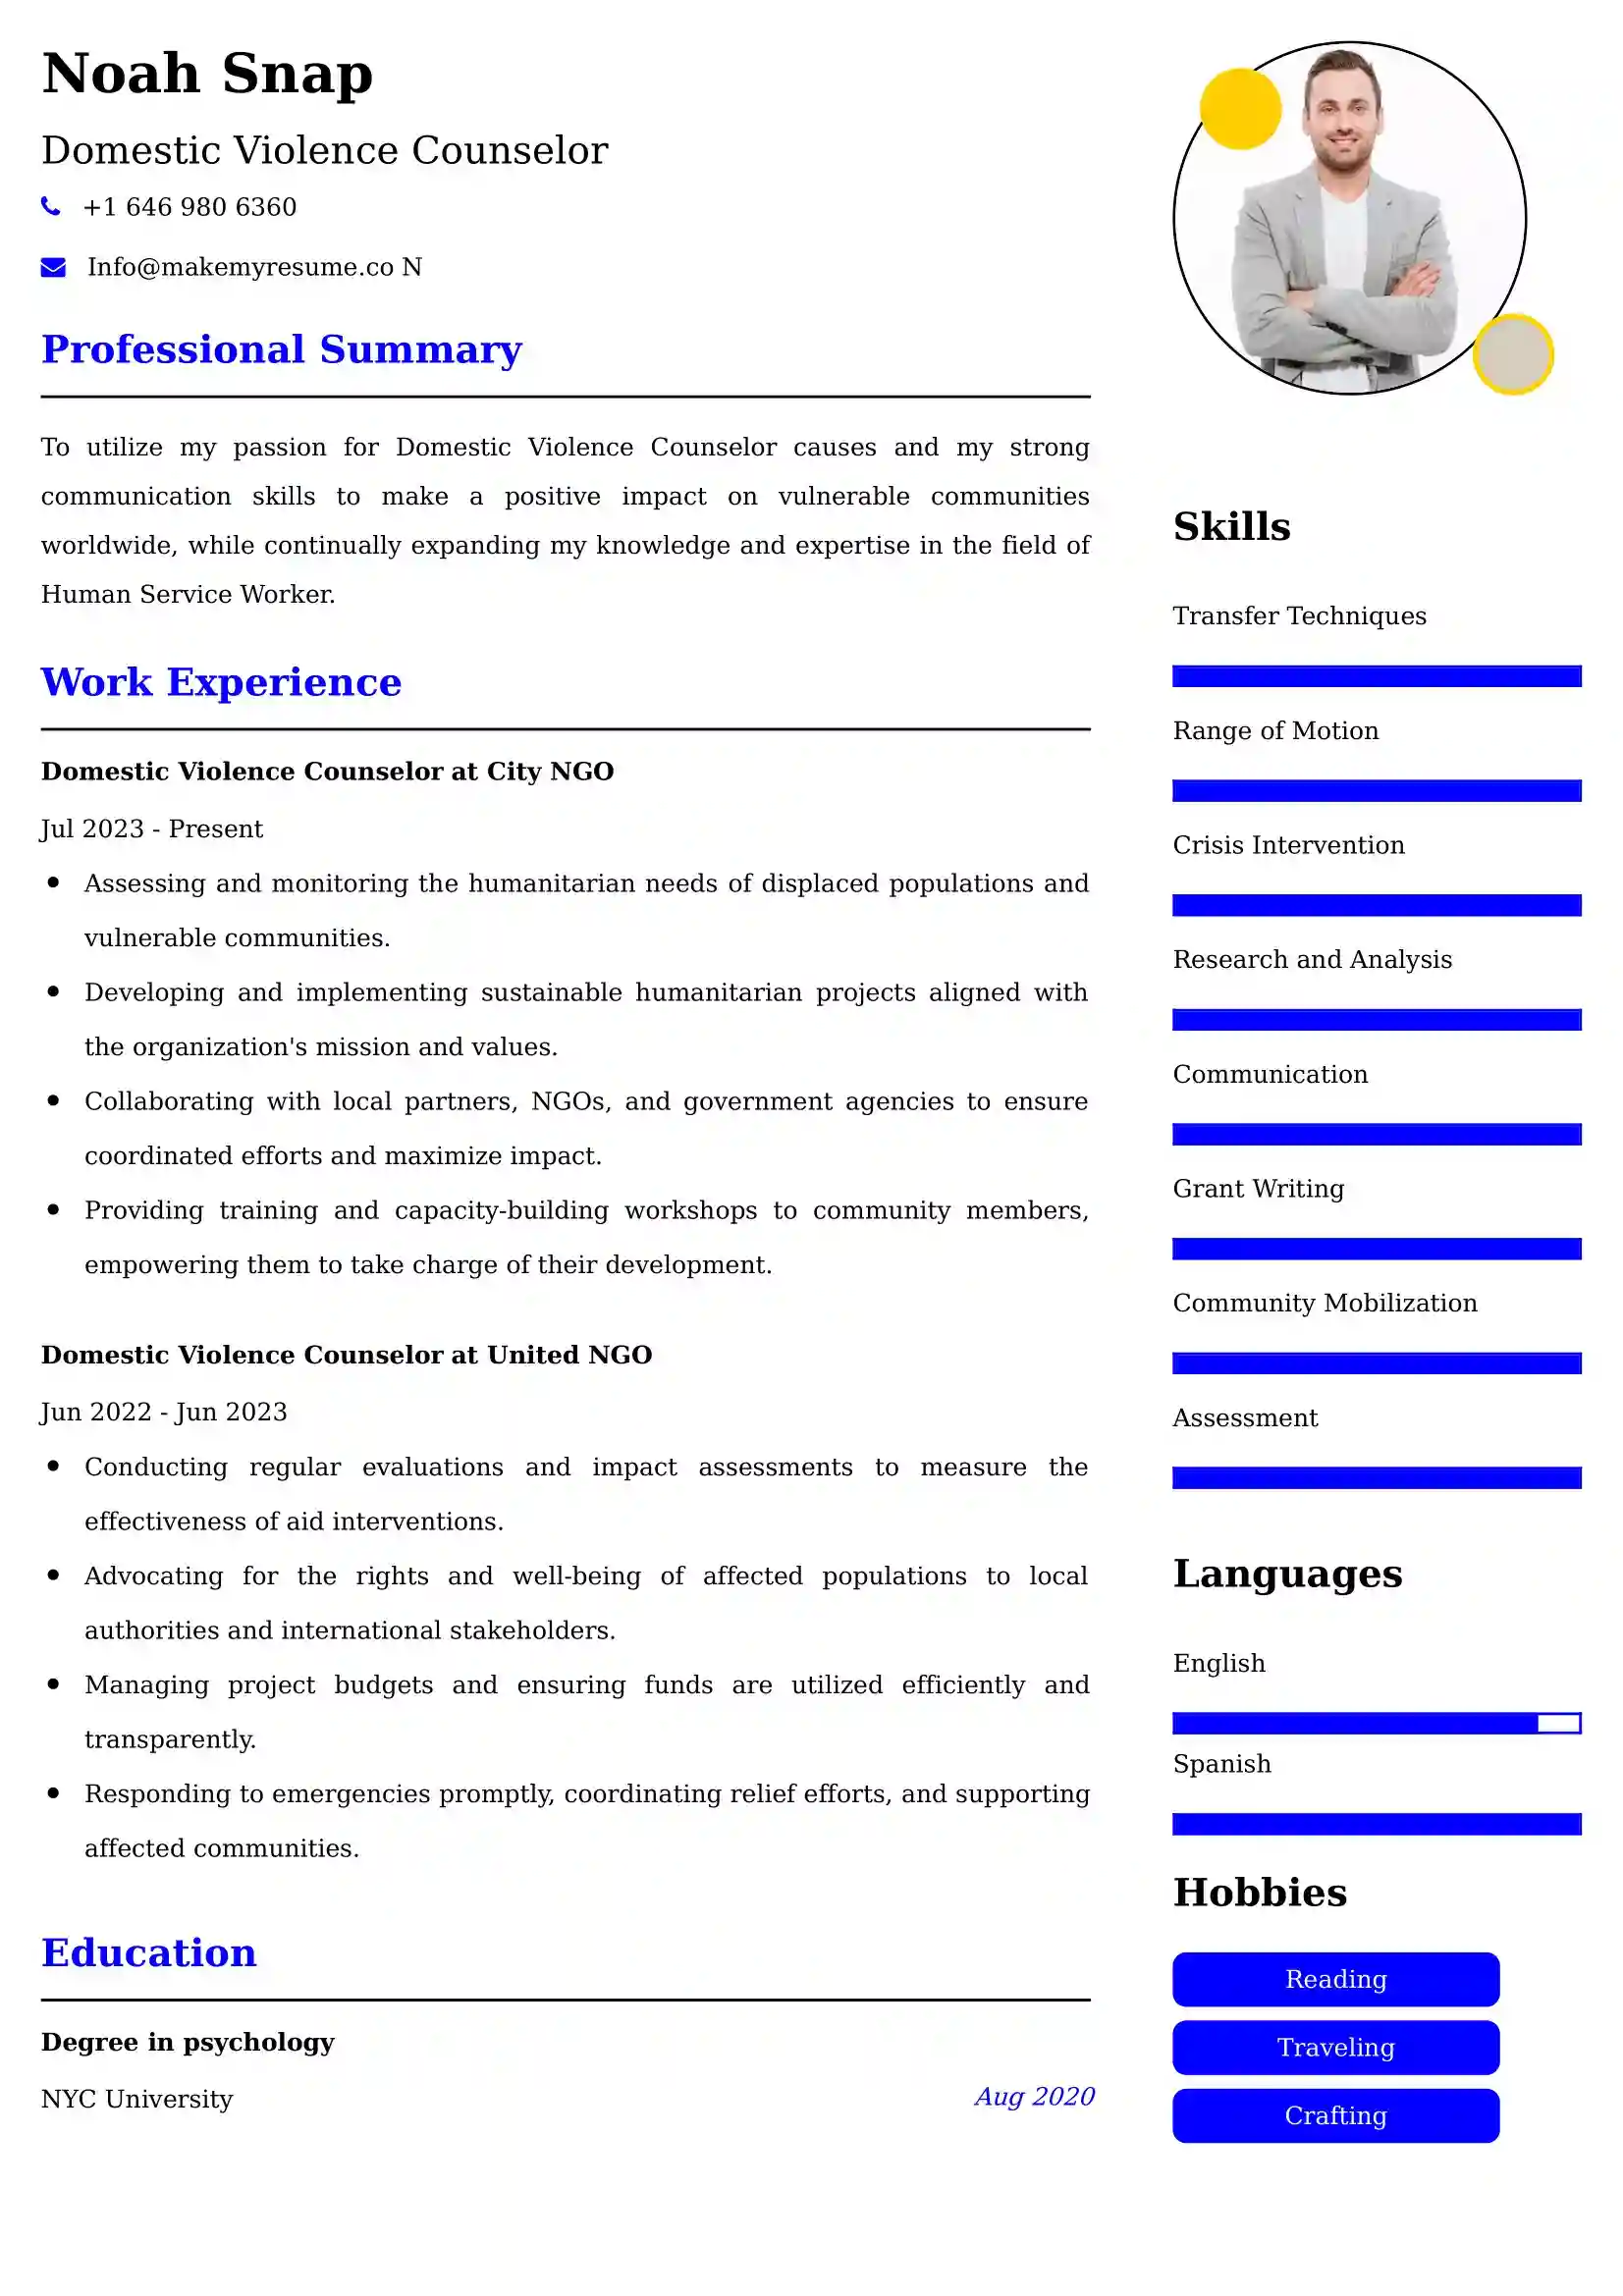 Best Domestic Violence Counselor Resume Examples for UK